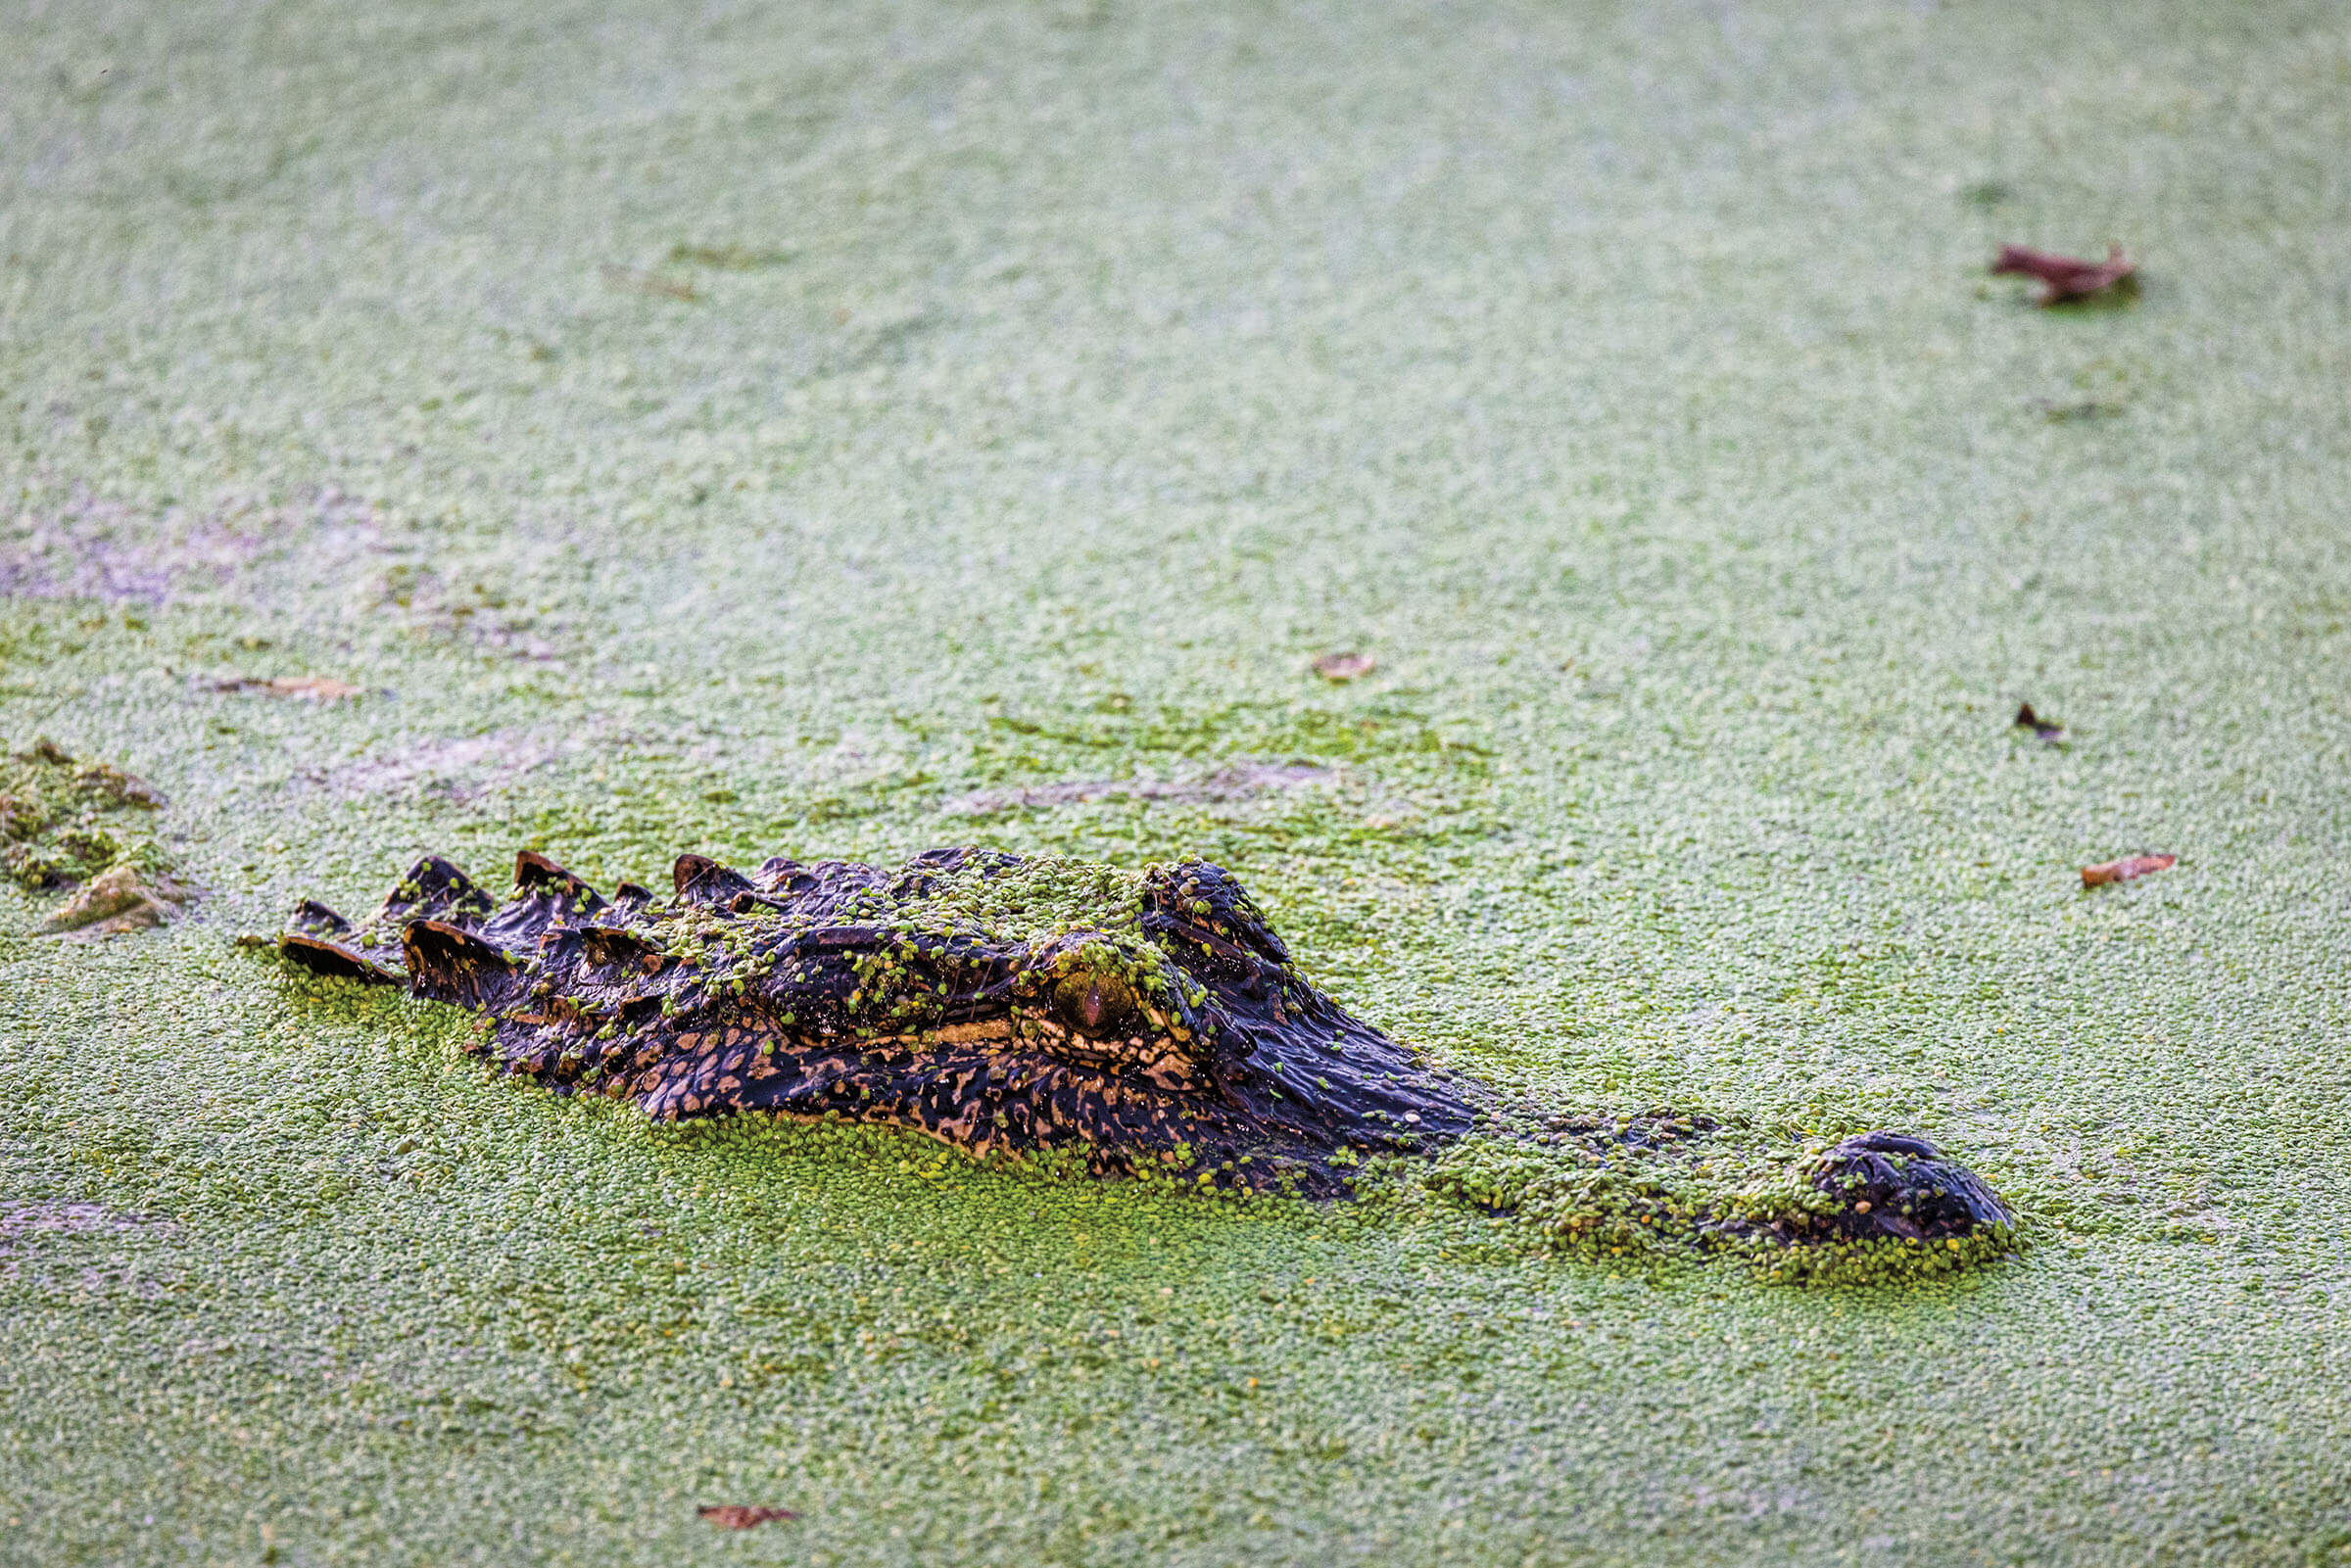 The dark head of an alligator rises from a marshy green water